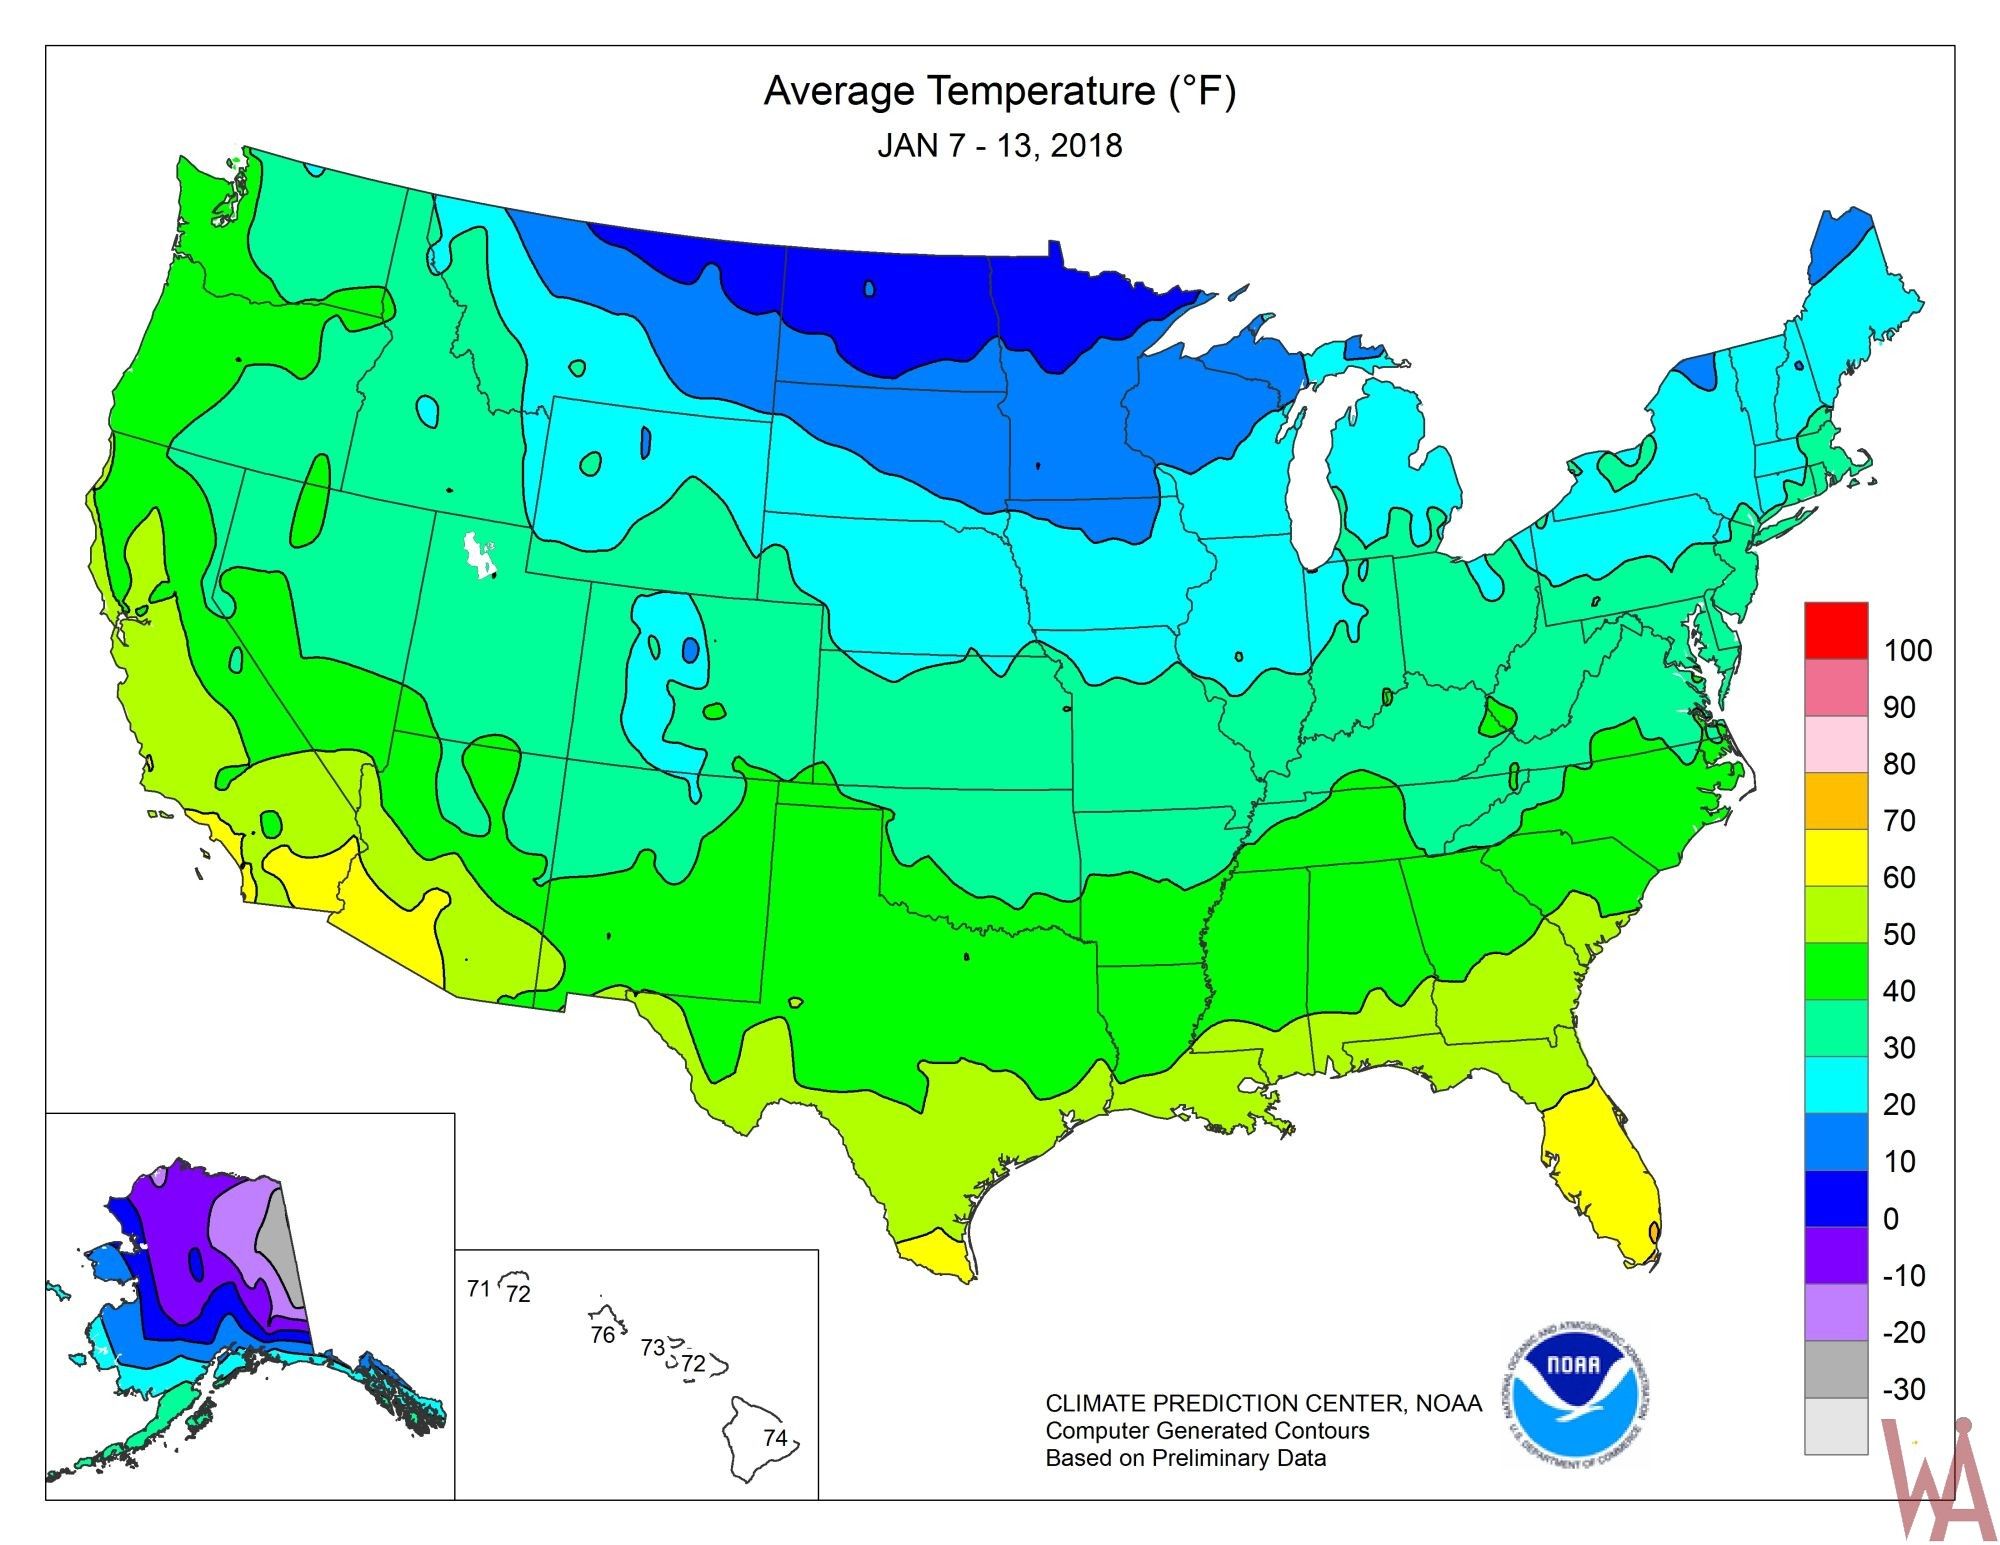 Average Temperature Map of the United States January 2018